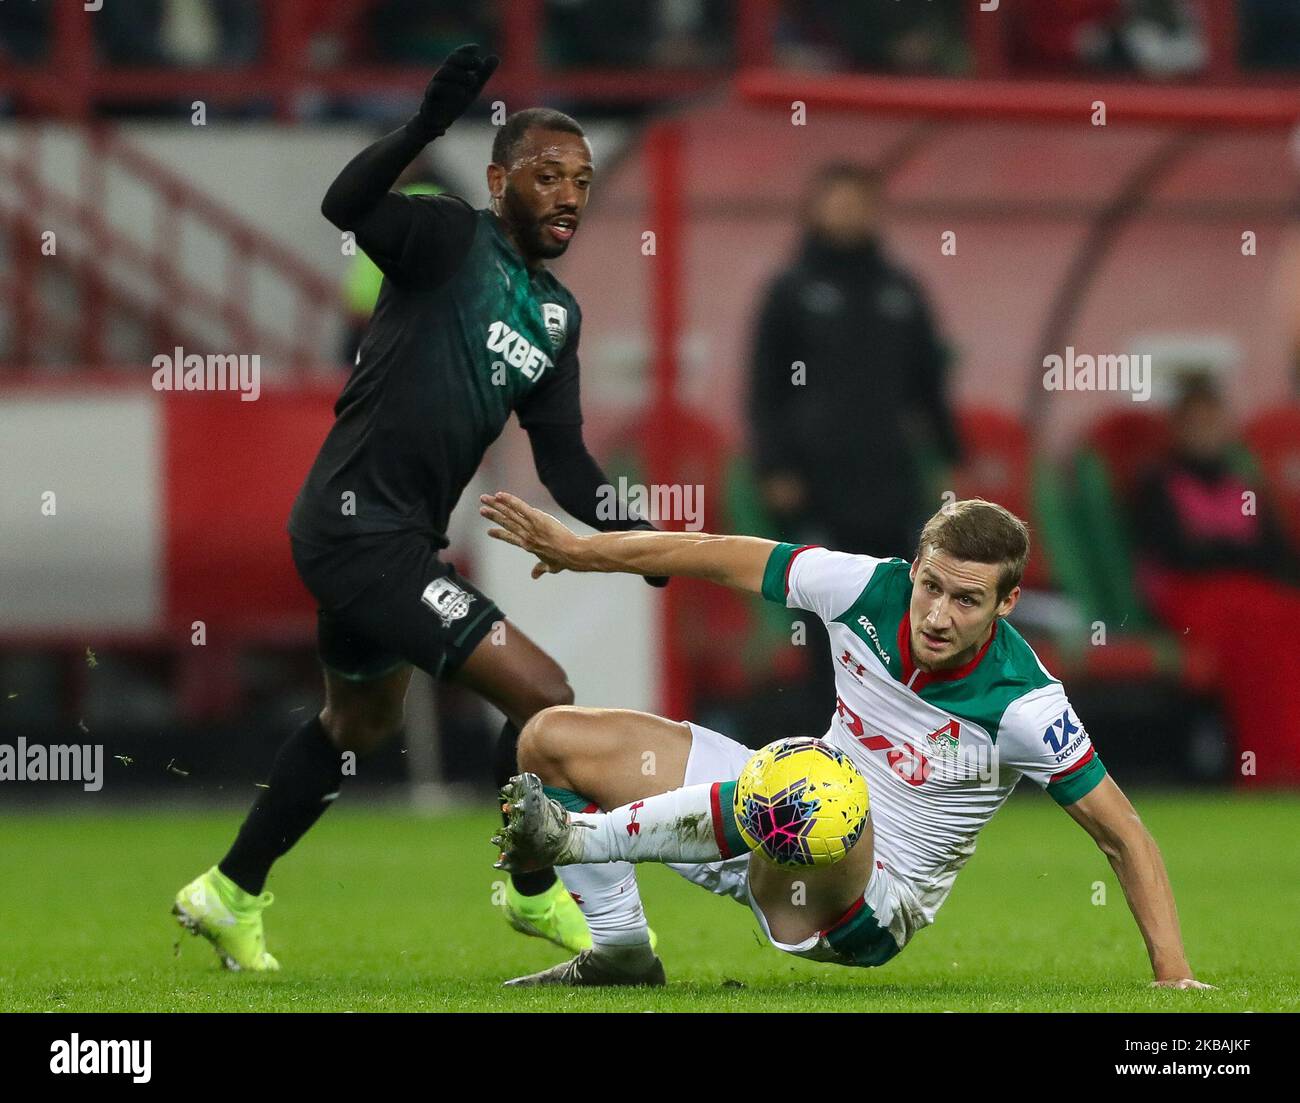 Dmitri Zhivoglyadov (R) of FC Lokomotiv Moscow and Manuel Fernandes of FC Krasnodar vie for the ball during the Russian Football League match between FC Lokomotiv Moscow and FC Krasnodar at RZD Arena on November 10, 2019, in Moscow, Russia. (Photo by Igor Russak/NurPhoto) Stock Photo